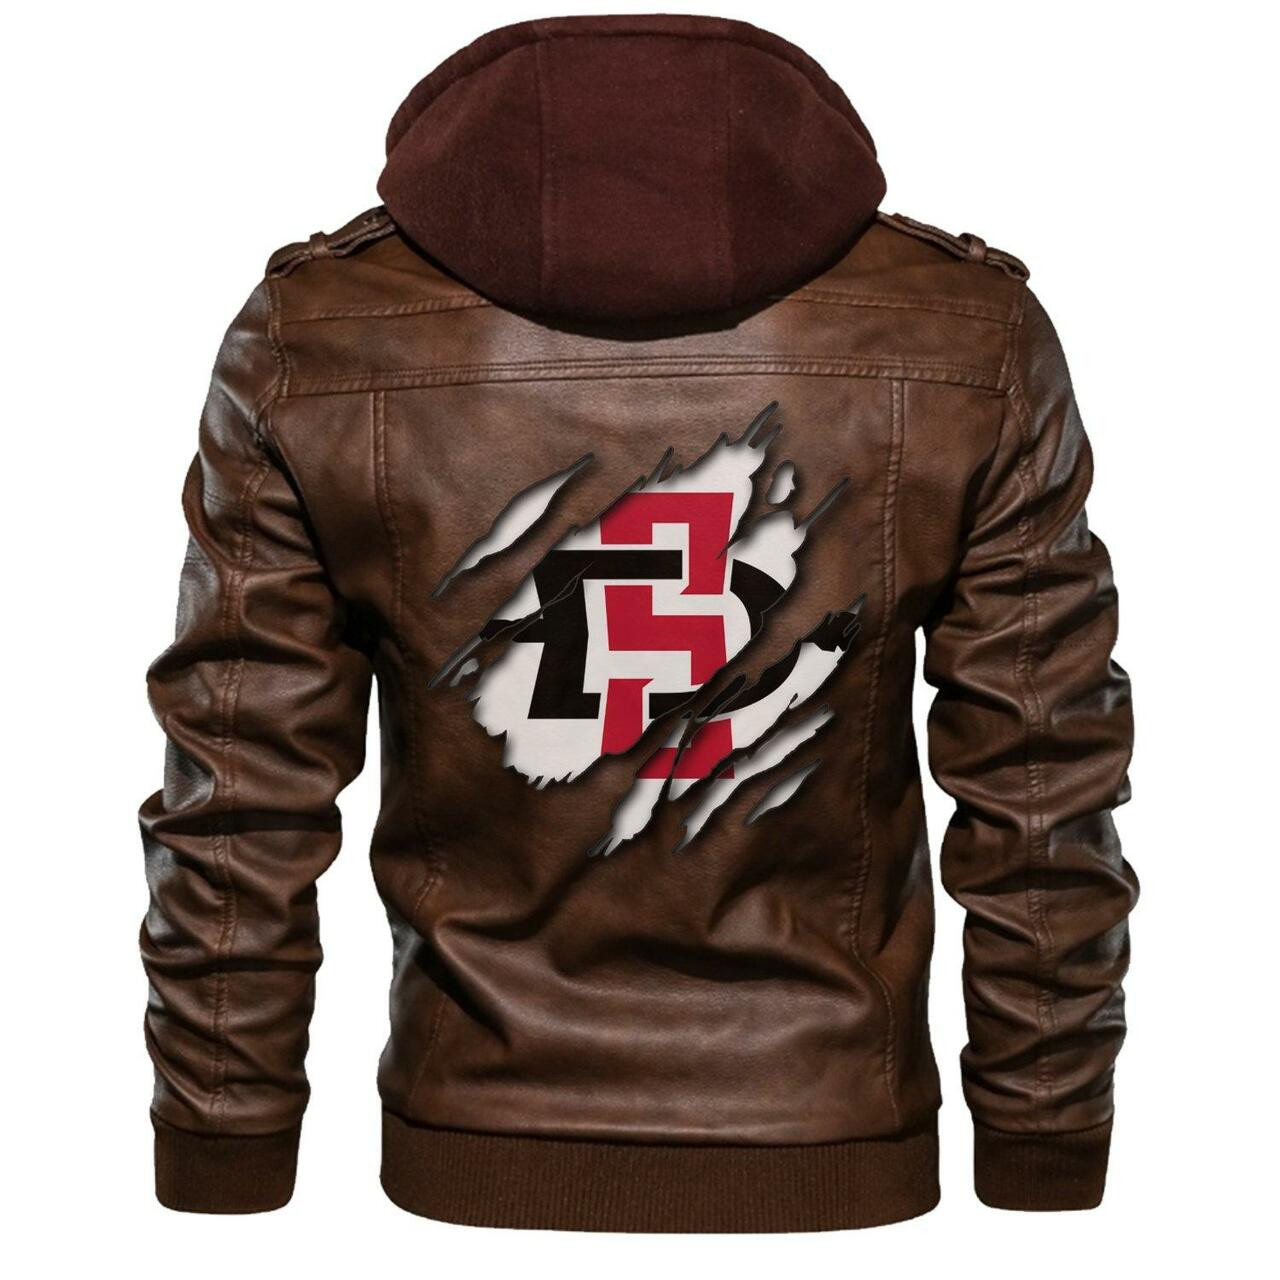 This leather Jacket will look great on you and make you stand out from the crowd 267